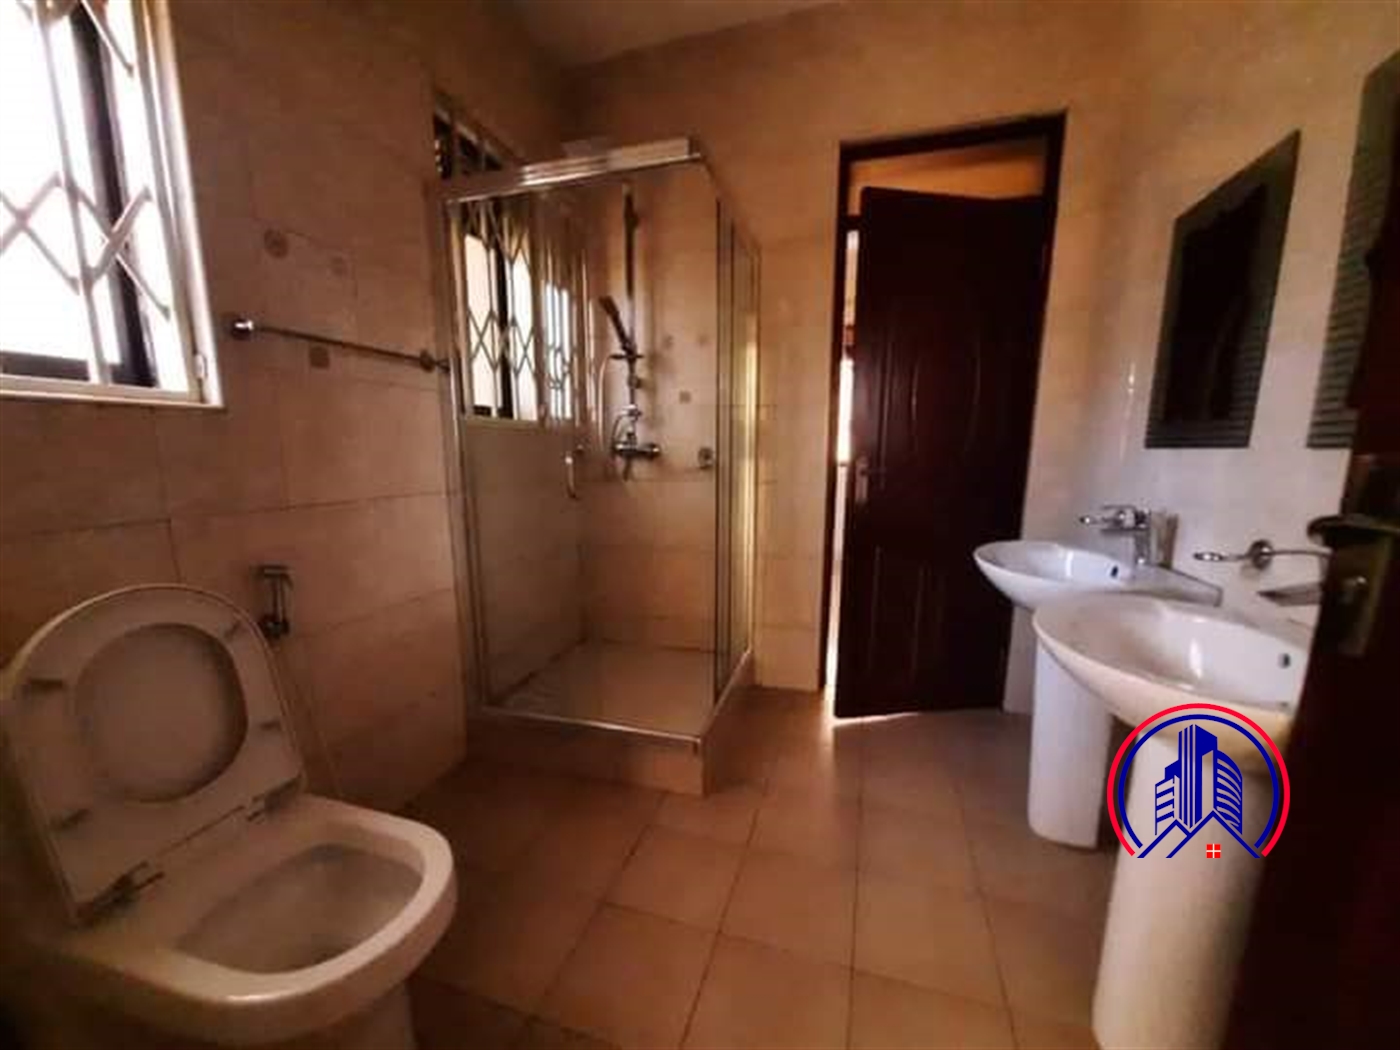 Storeyed house for rent in Kyanja Wakiso